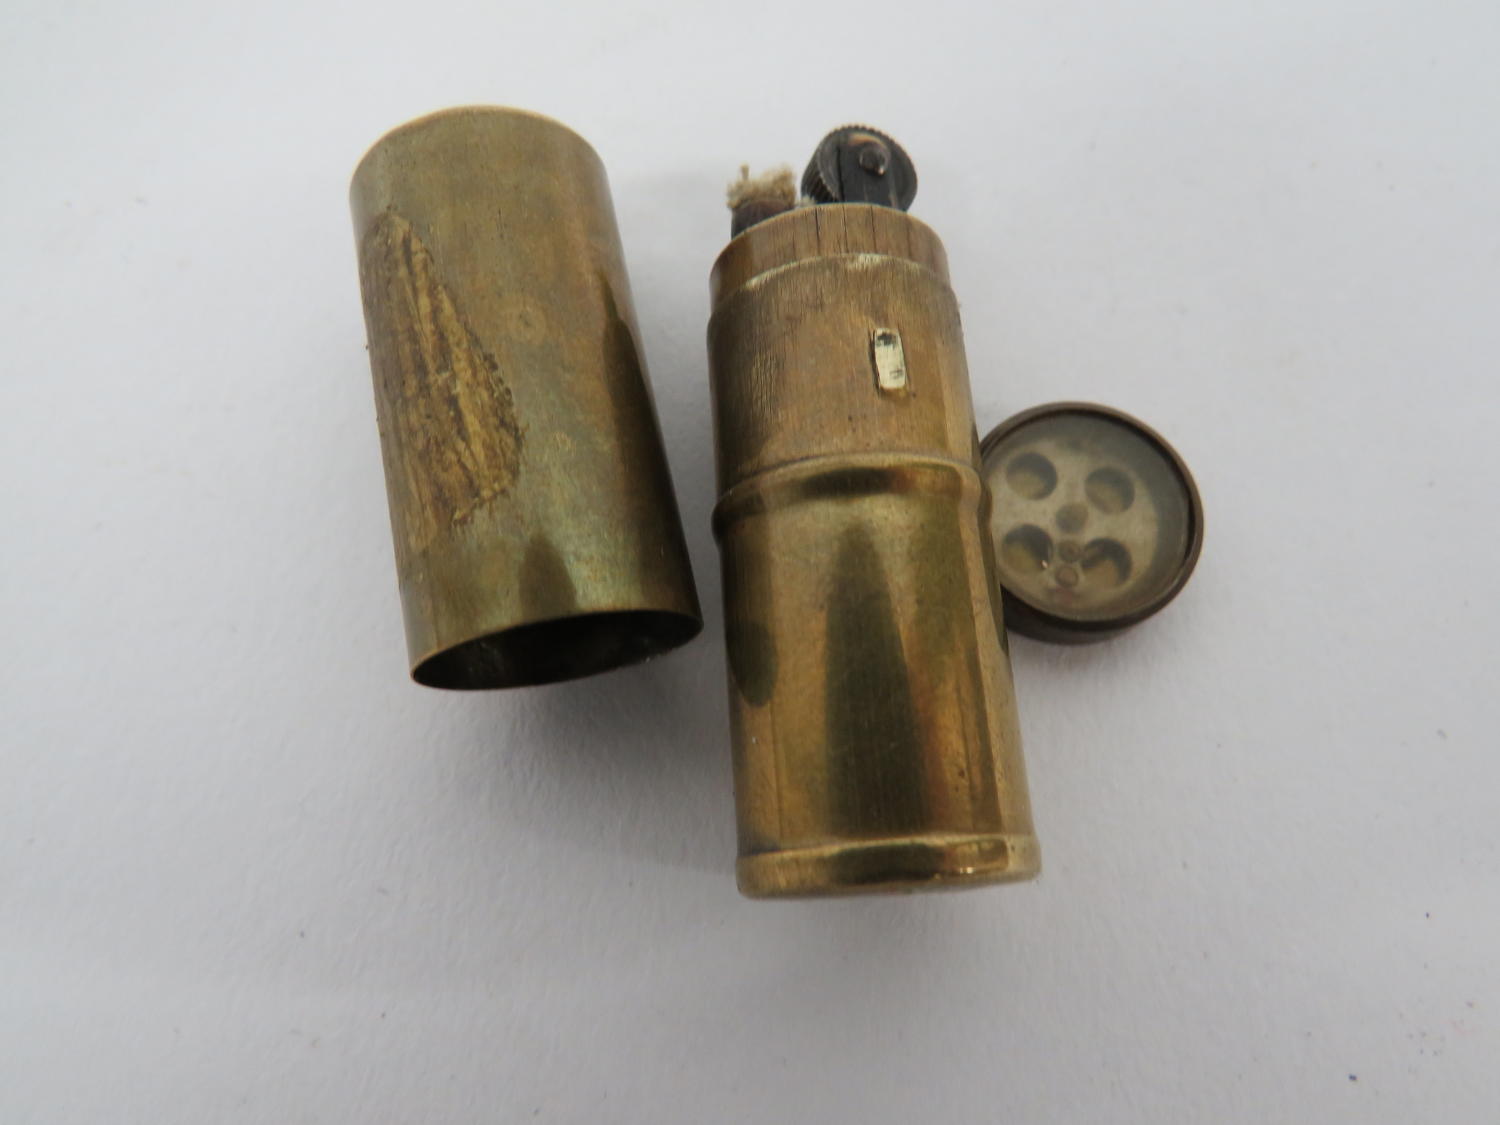 Early War Escape and Evasion Lighter Compass